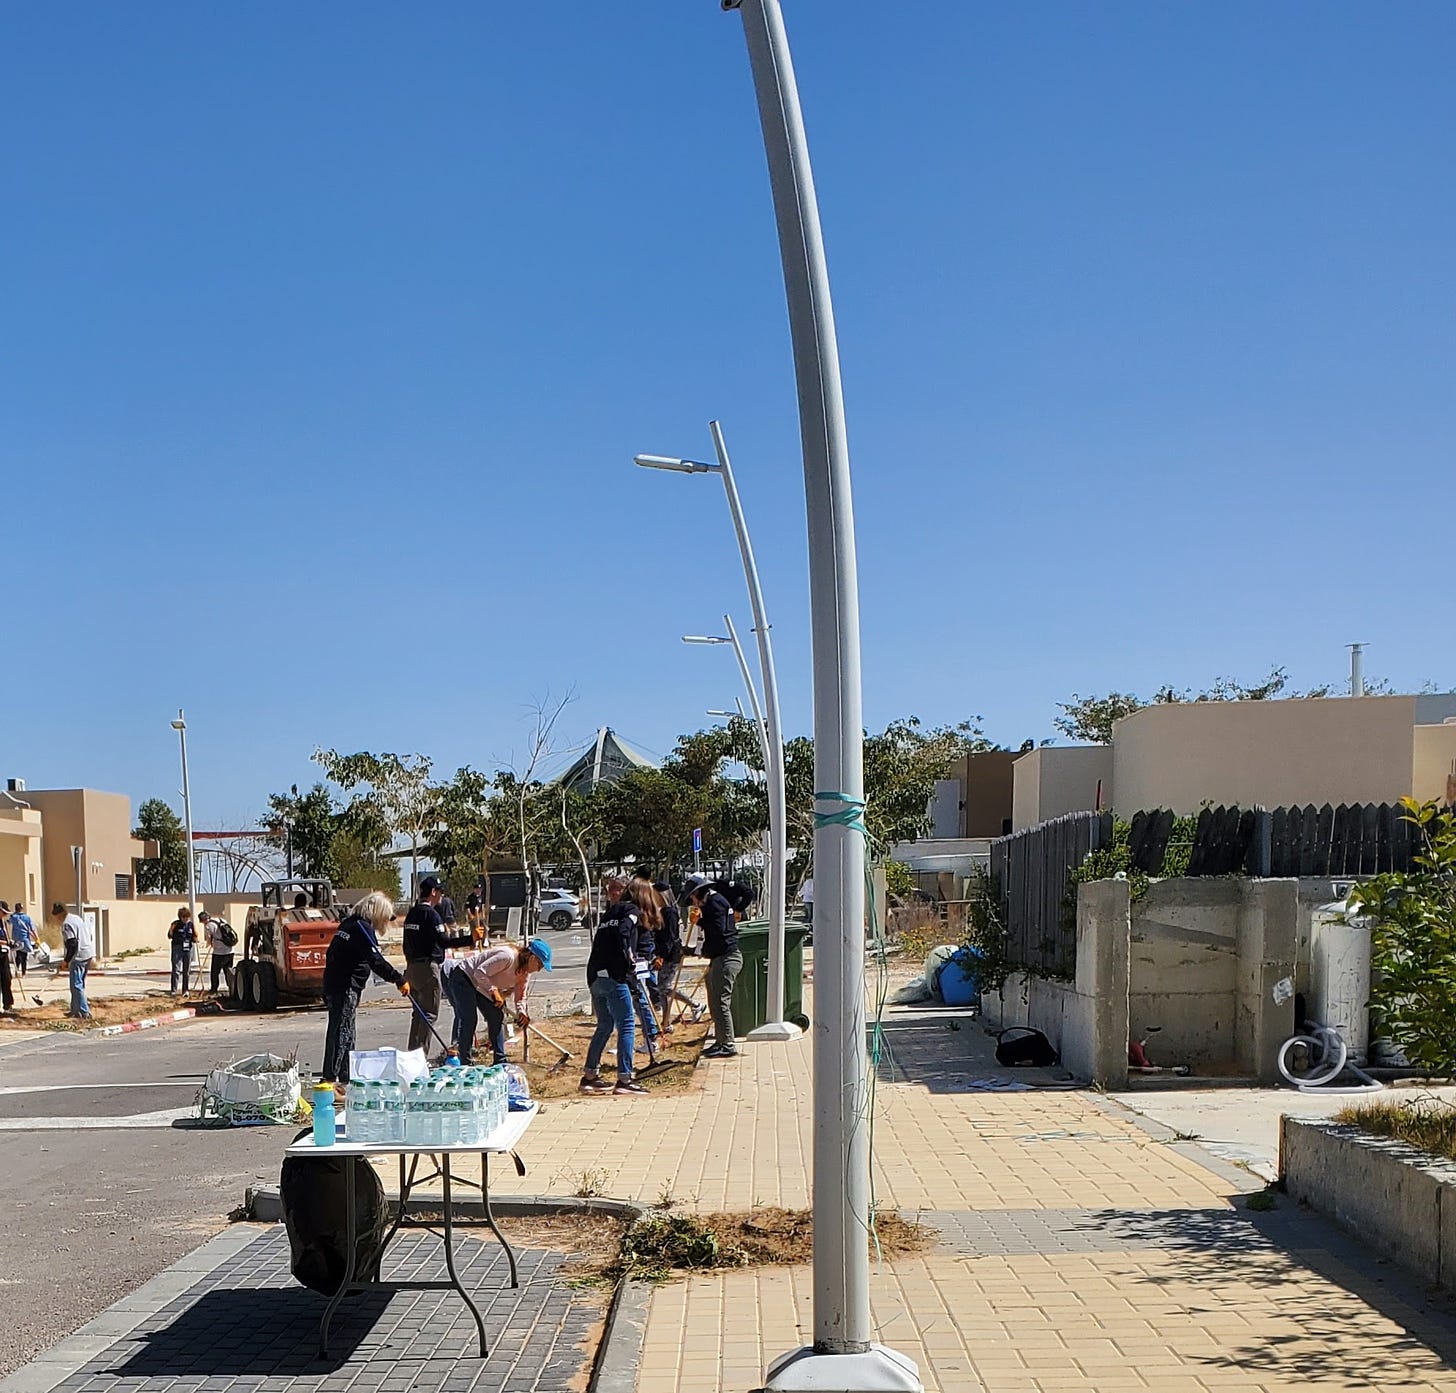 A group of volunteers with garden tools in front of square, concrete homes under a blue cloudless sky. 